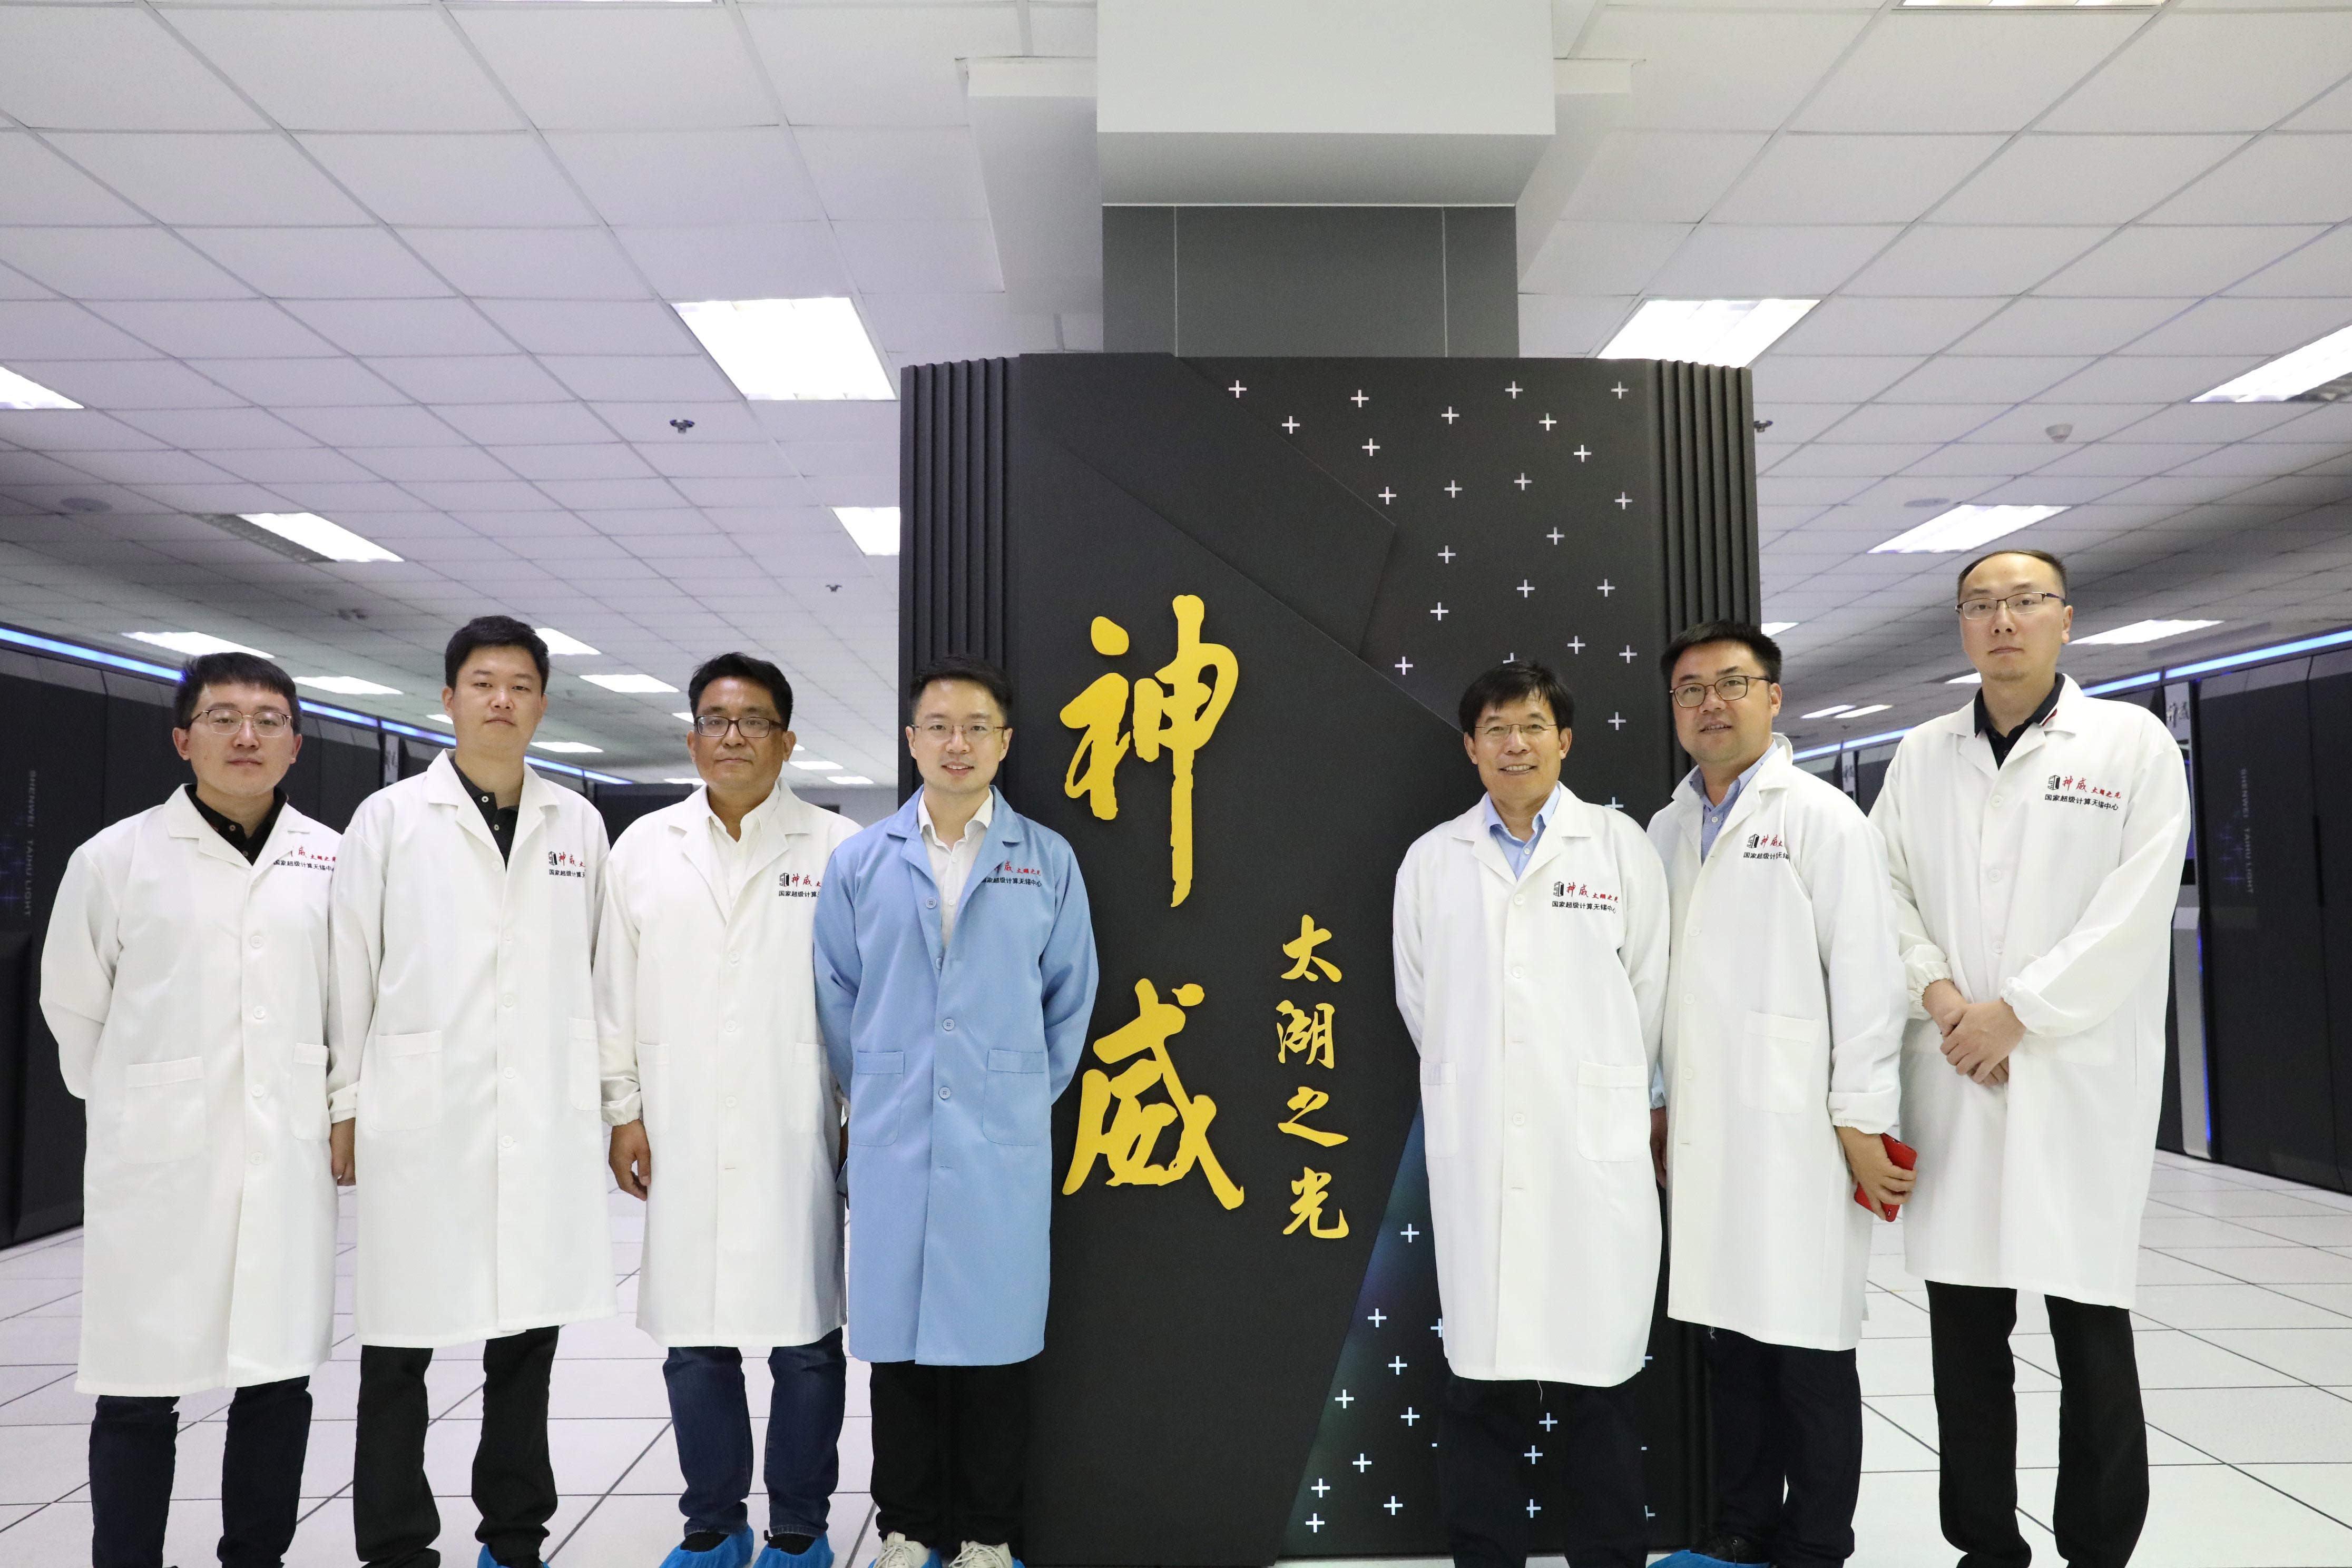 China Meteorological Administration leaders inspected Ninecosmos Science And Technology